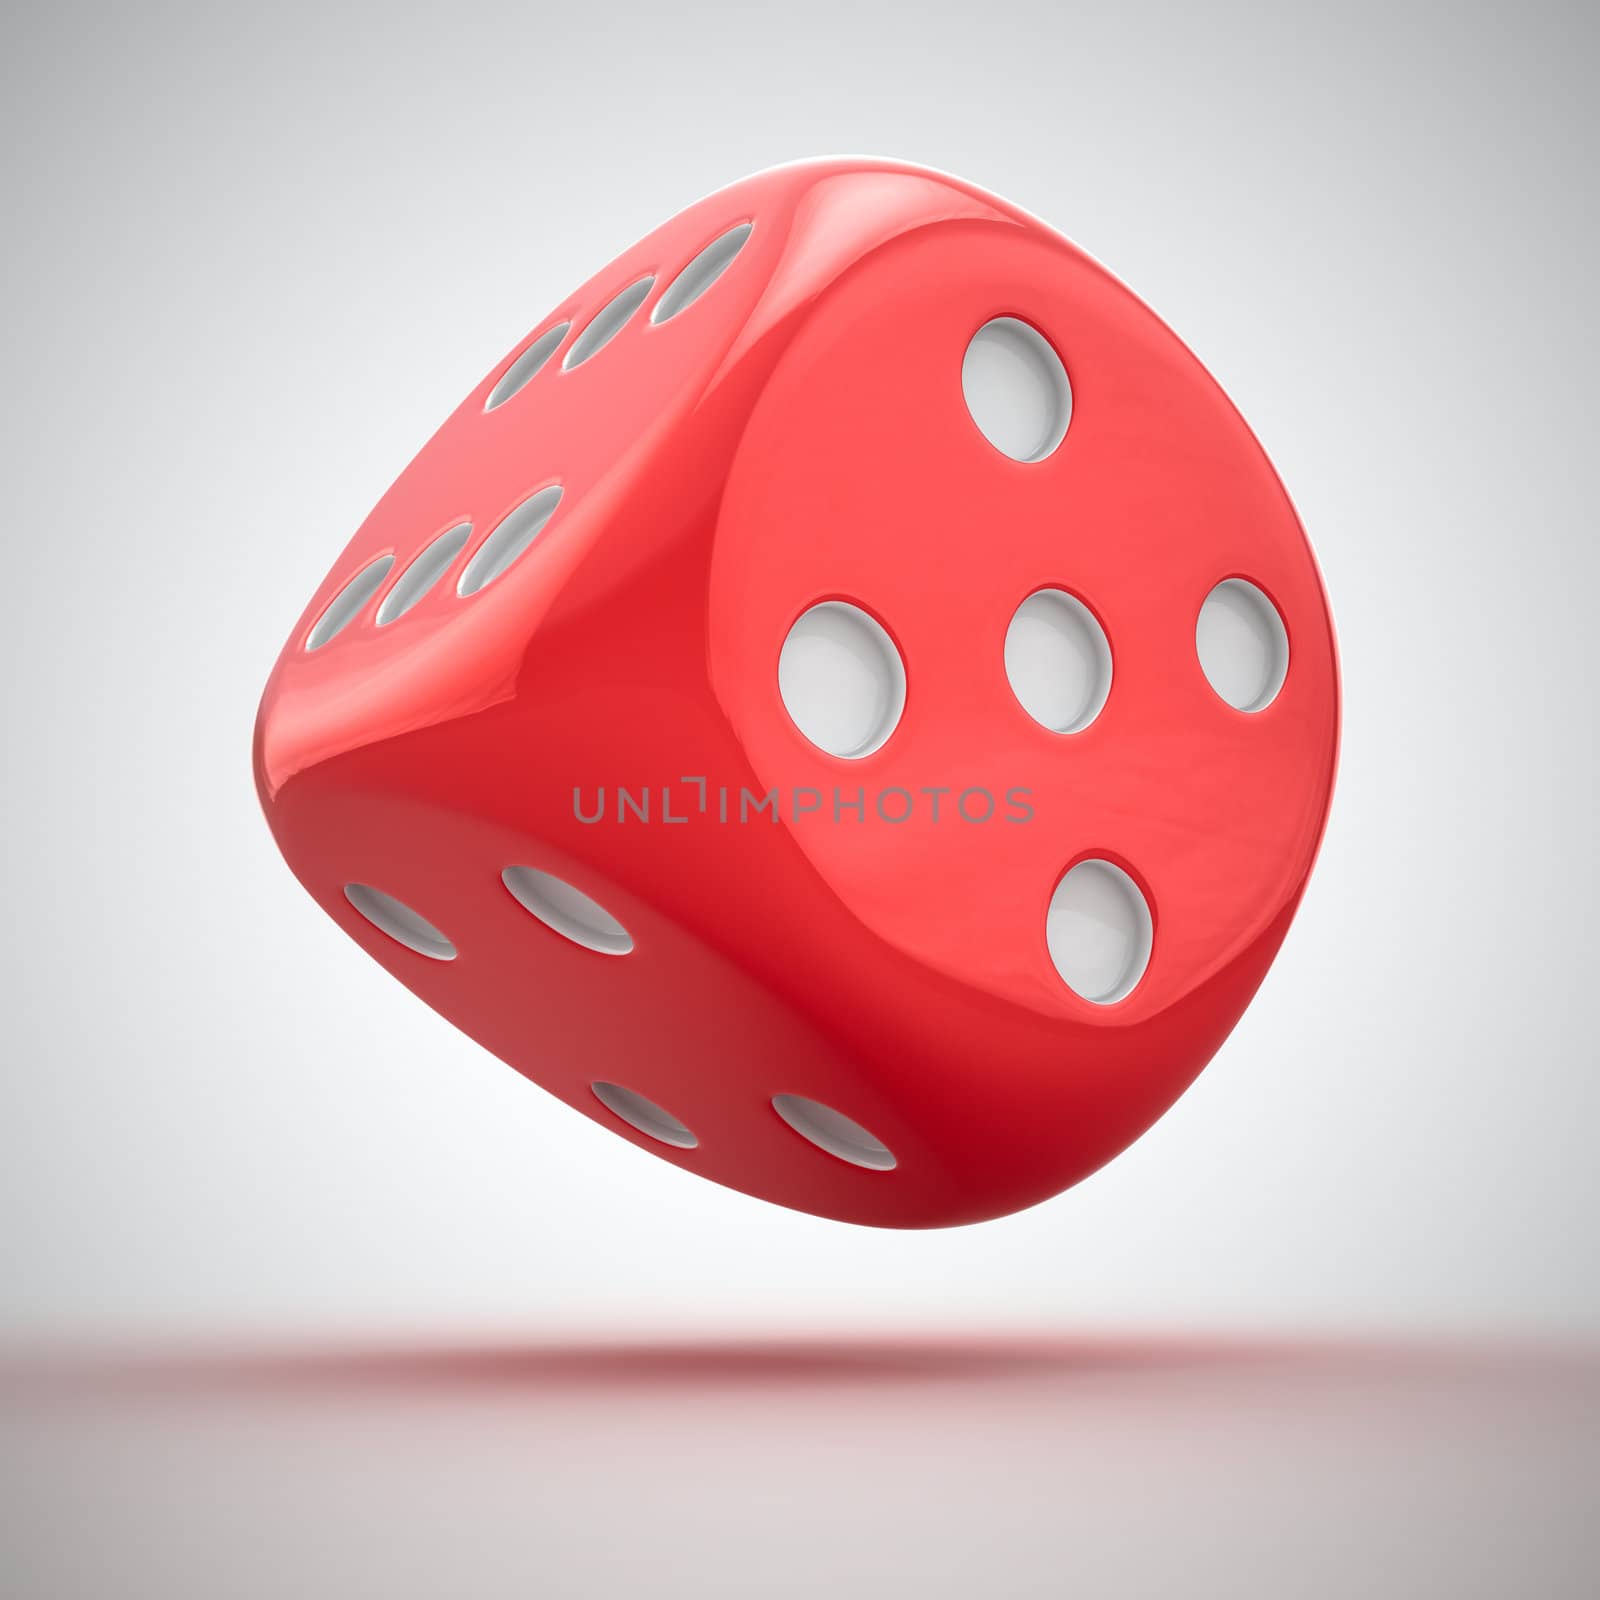 One big red dice on the white background